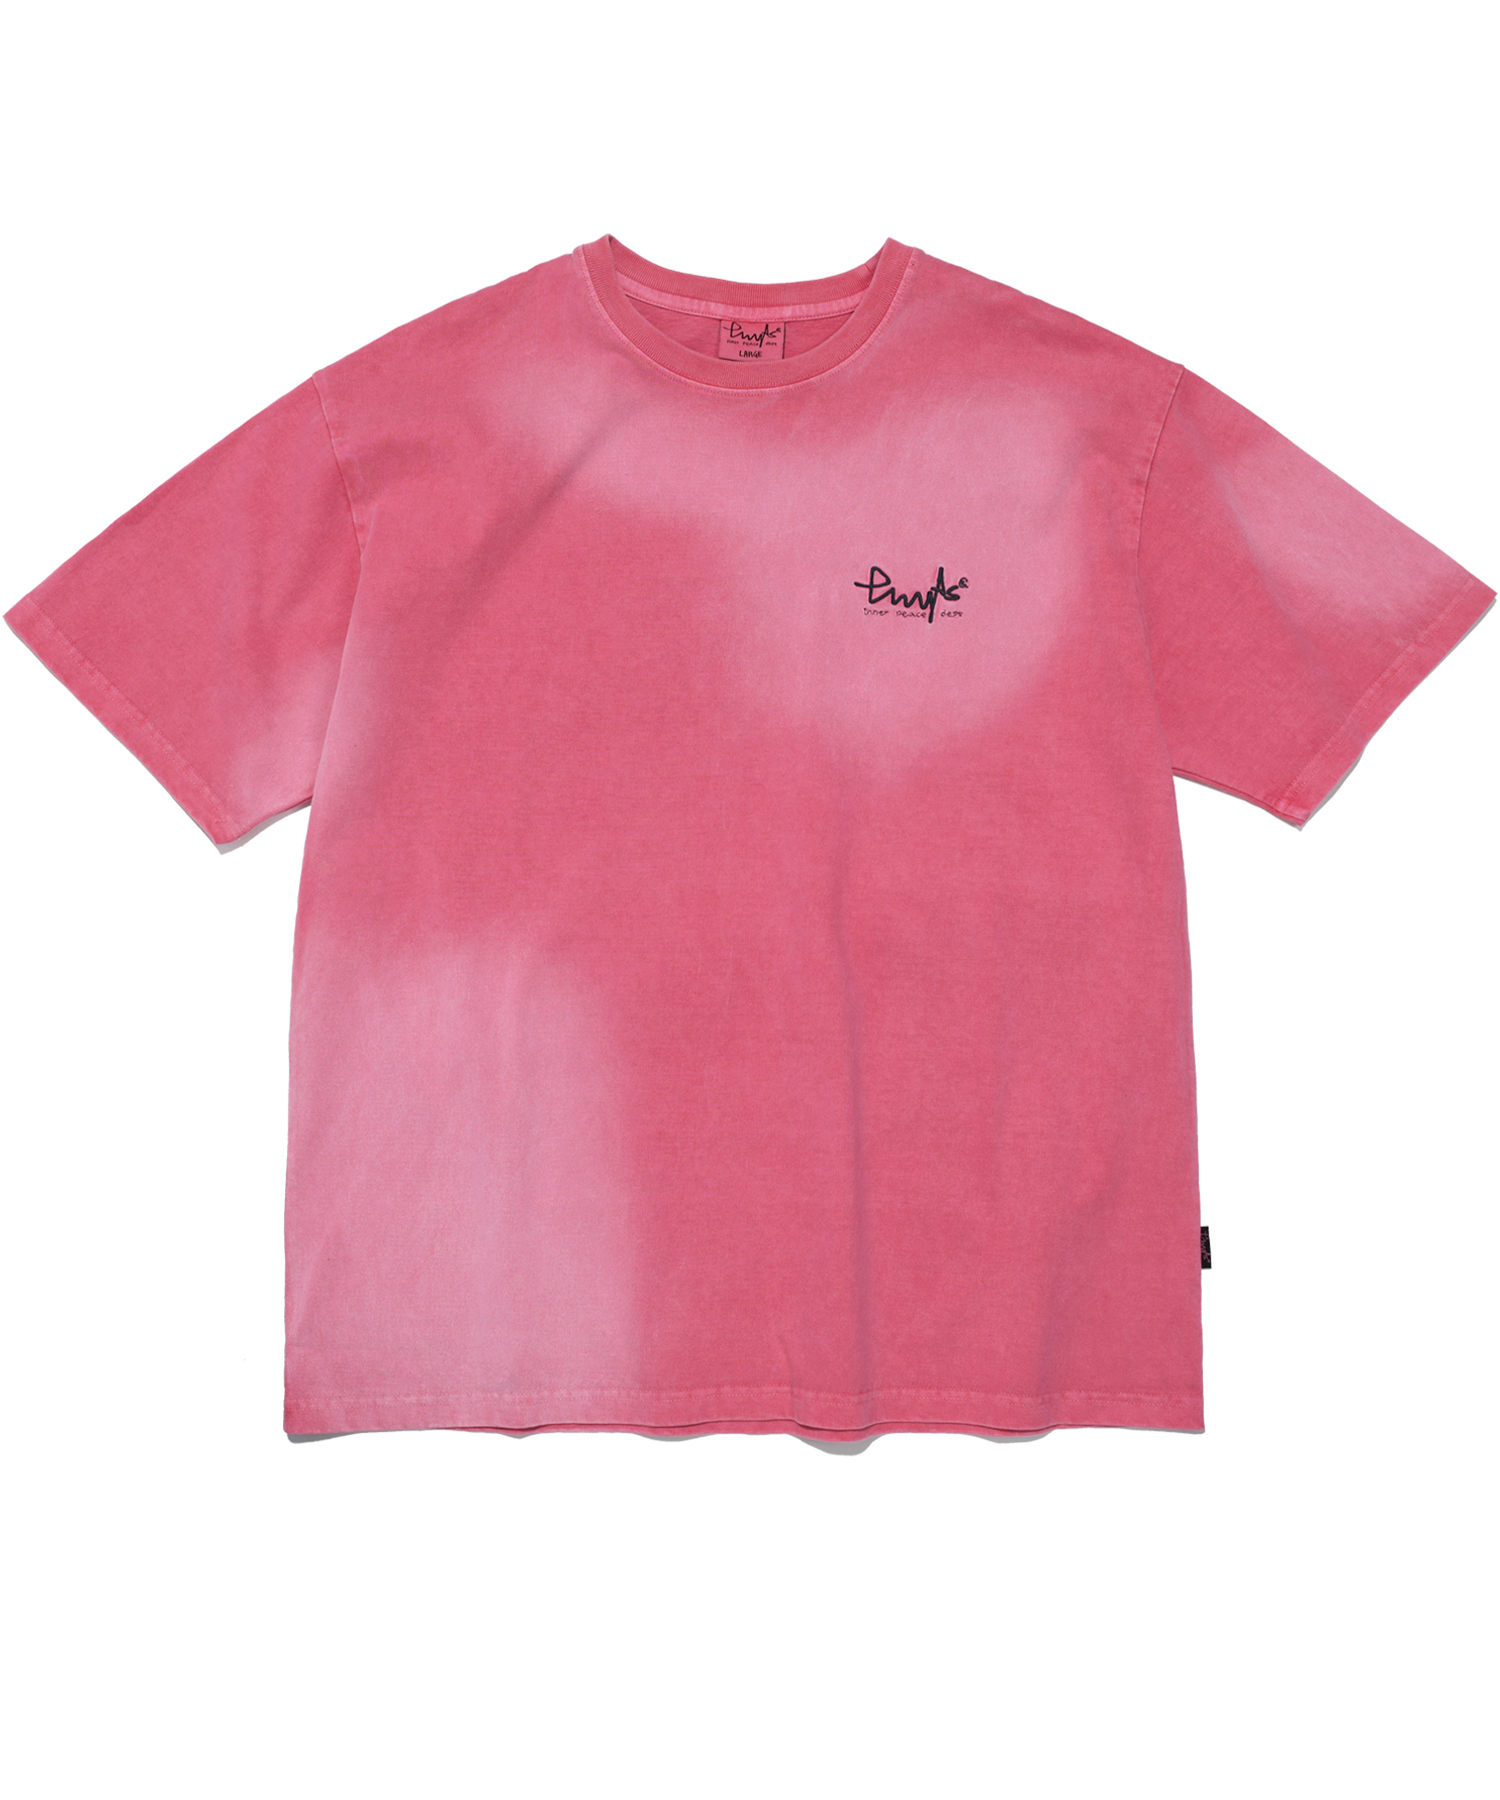 PHYPS® SMALL SIGN LOGO DYED SS PINK